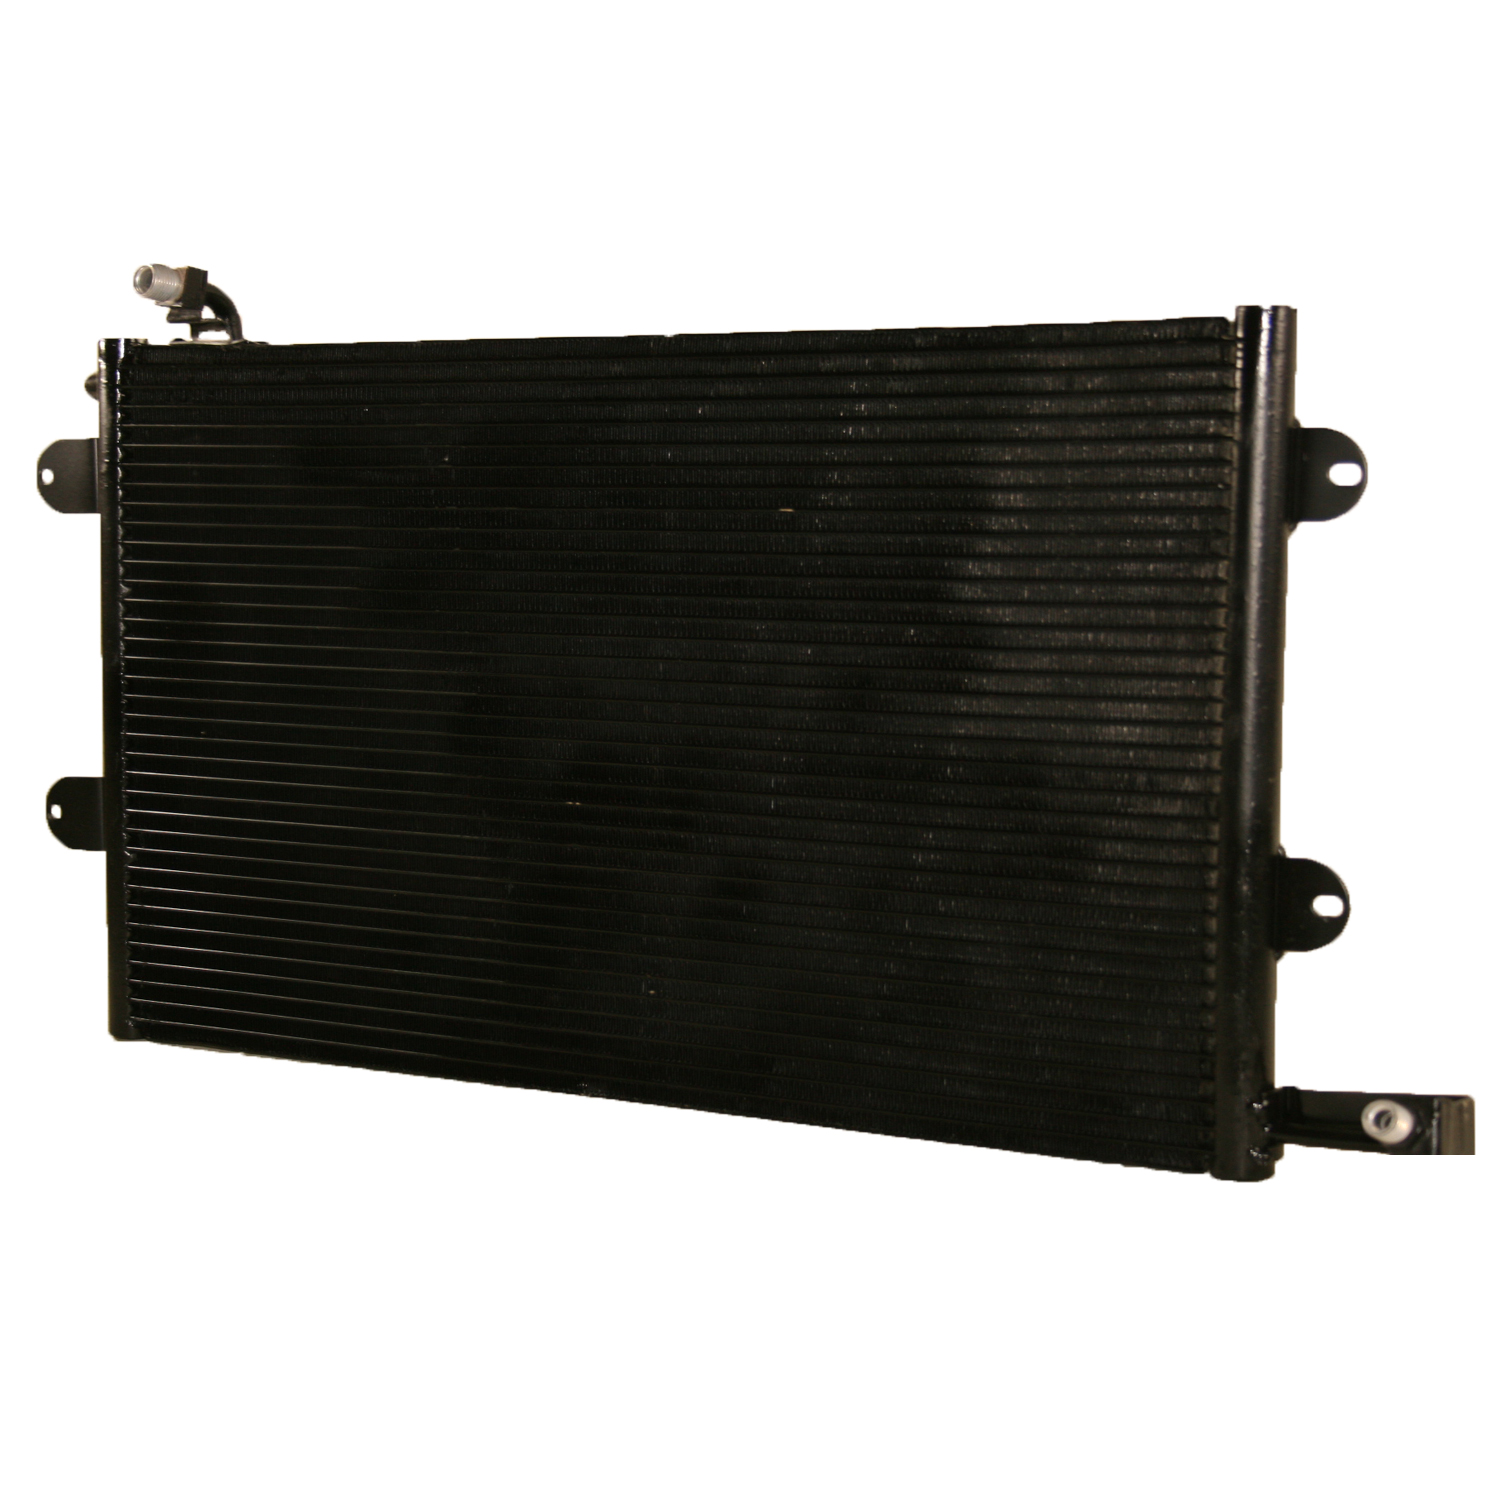 TCW Condenser 44-4645 New Product Image field_60b6a13a6e67c